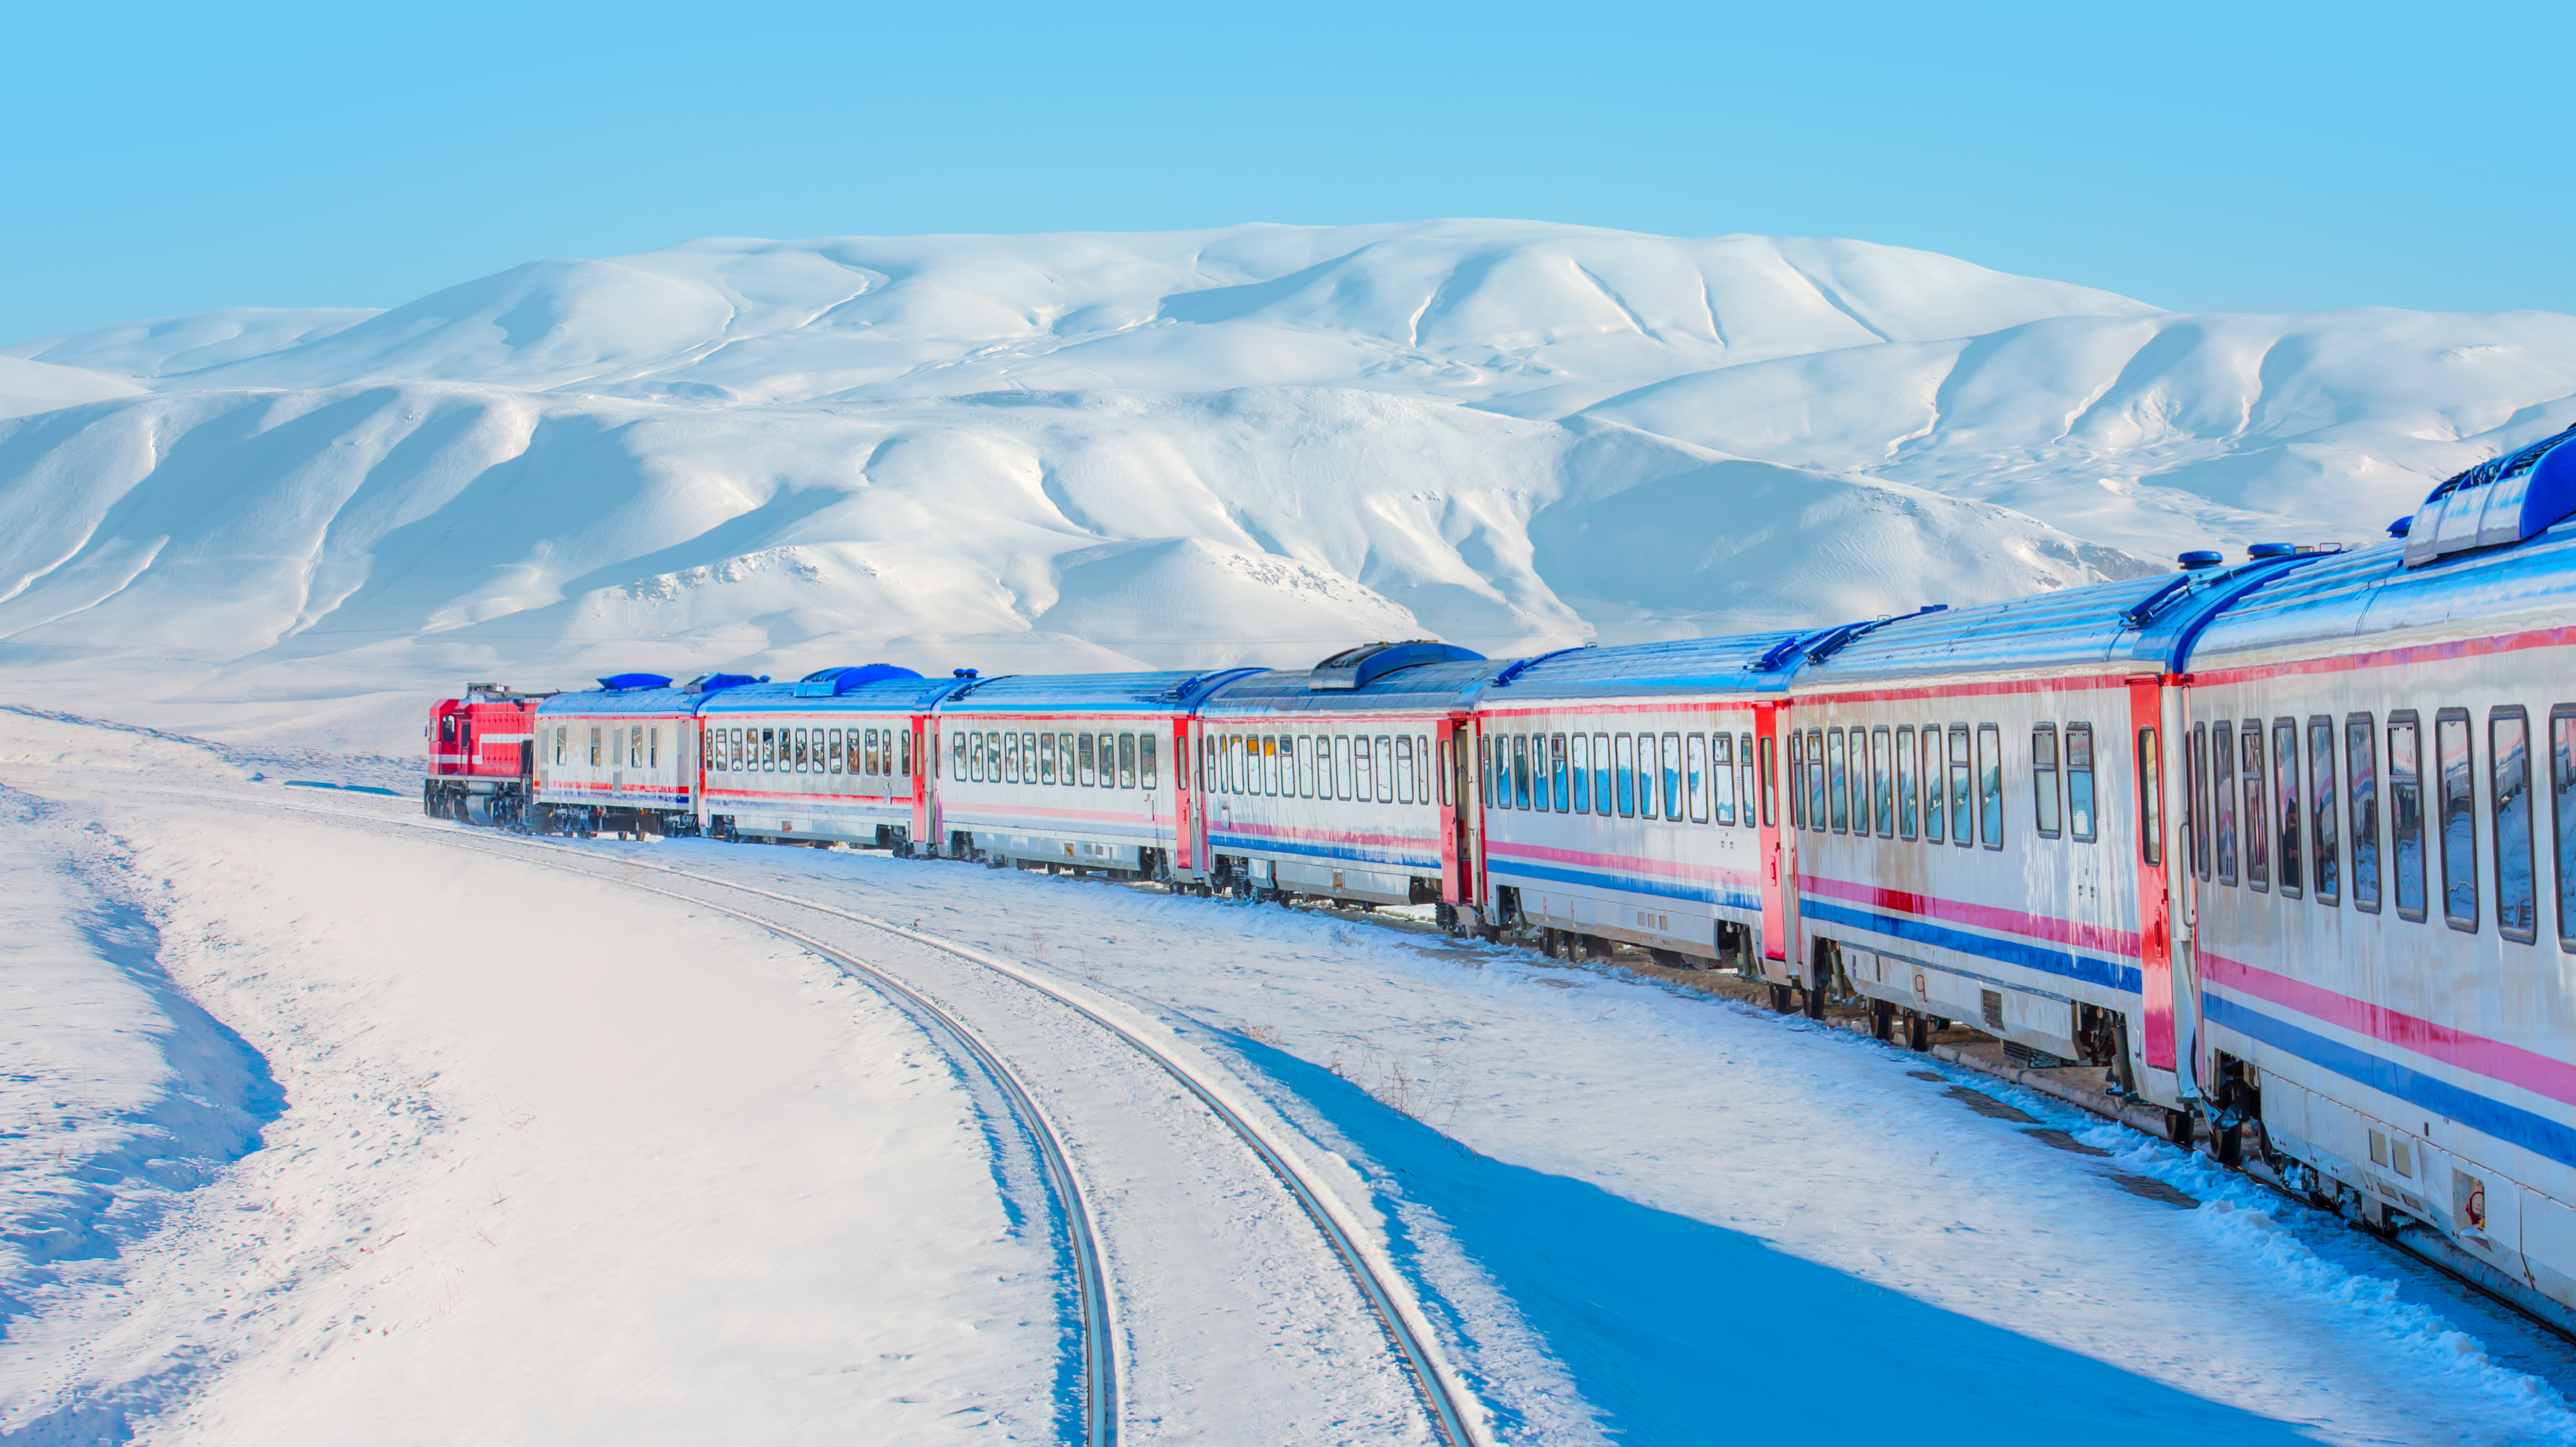 Red diesel train (East express) in motion at the snow covered railway platform - The train connecting Ankara to Kars - Turkey